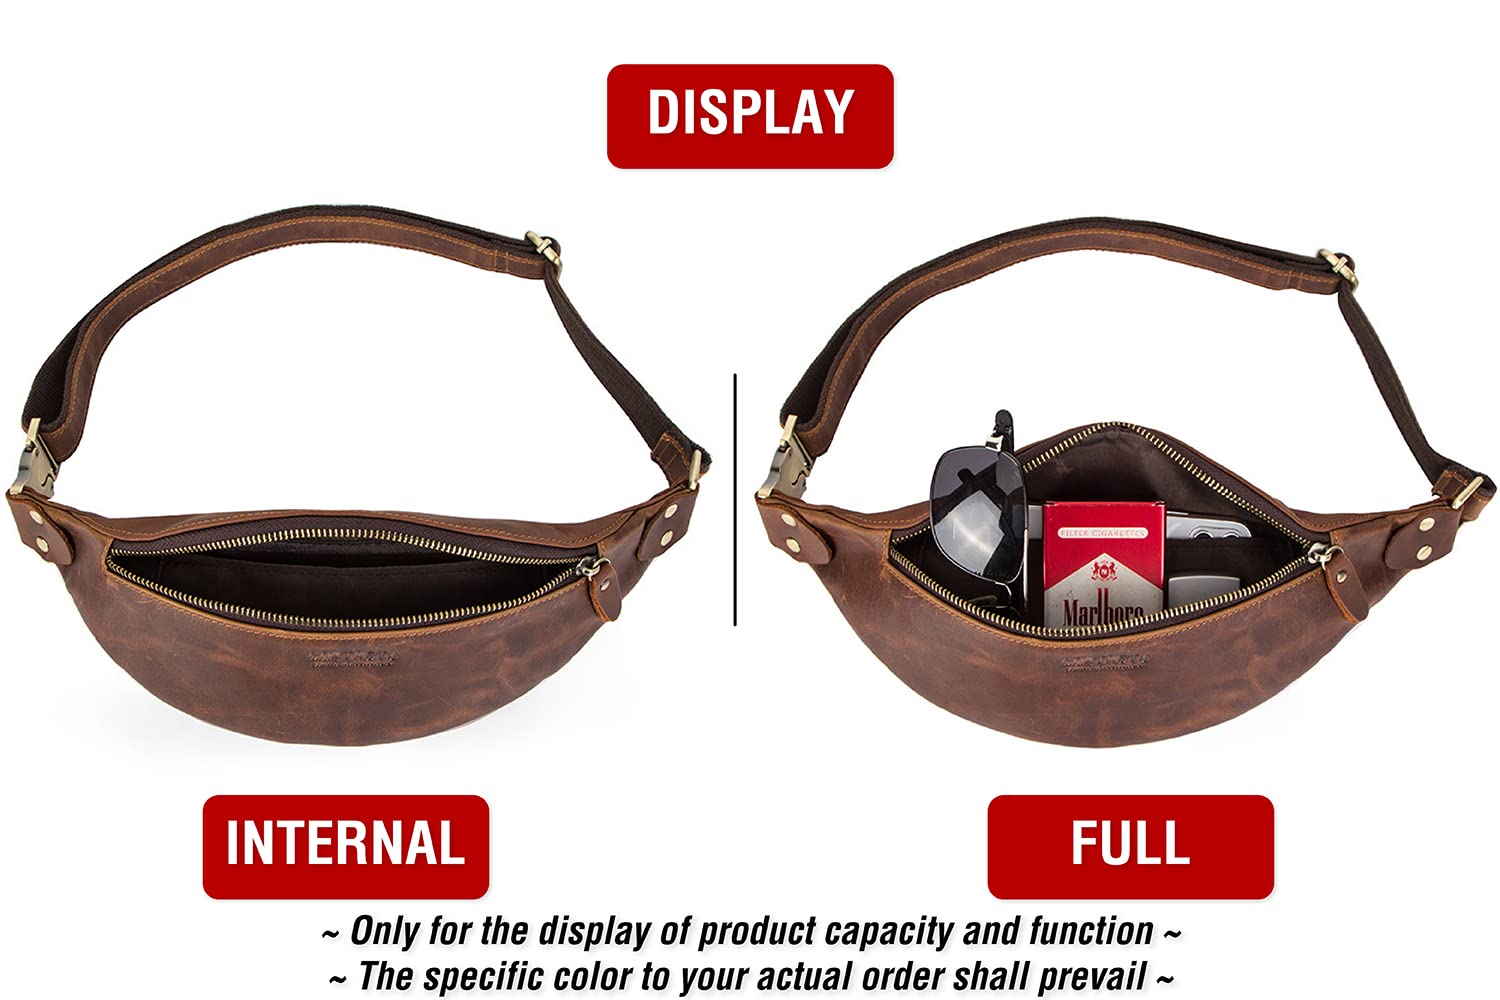 Top Grain Genuine Leather Slim Waist Pack for Man & Woman, Minimalist Vintage Design, Handmade with Detachable Hardware, Slim Fanny Pack Small Crossbody Belt Bag for Traveling or Riding, Coffee